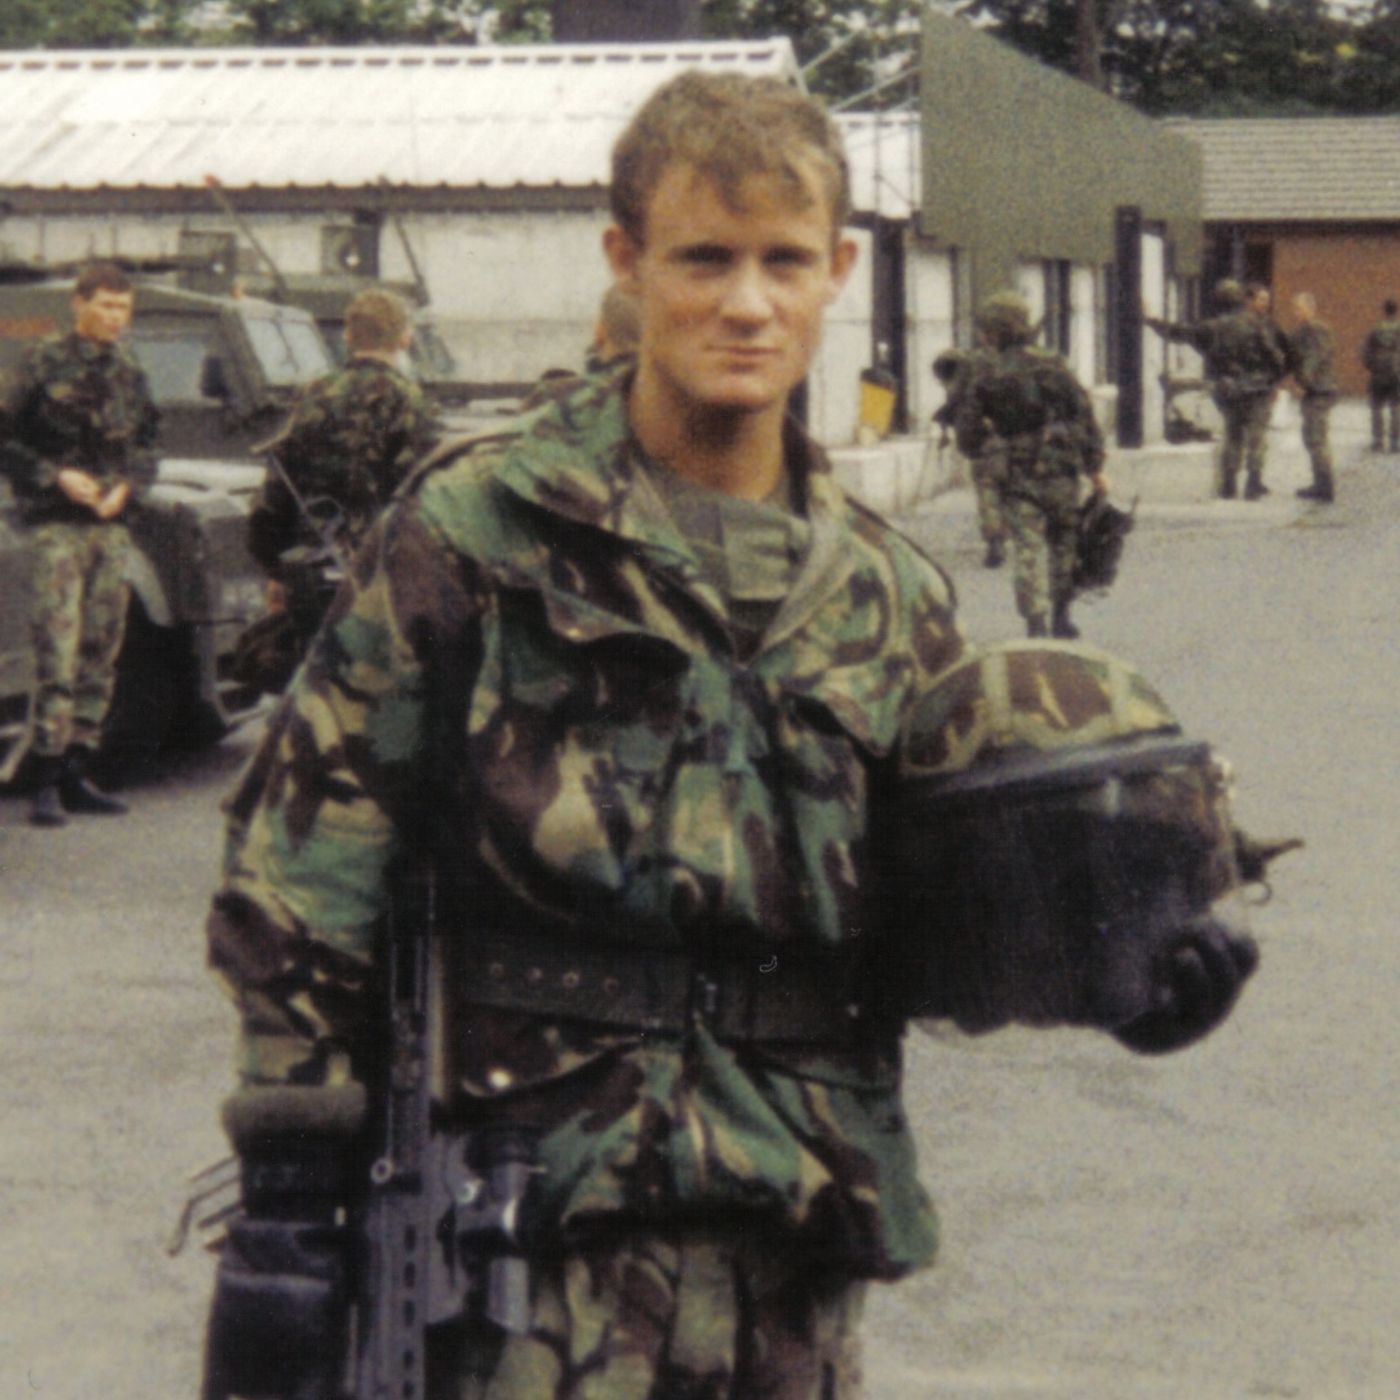 Fired Upon By the Provisional IRA: Chris Thrall's Story